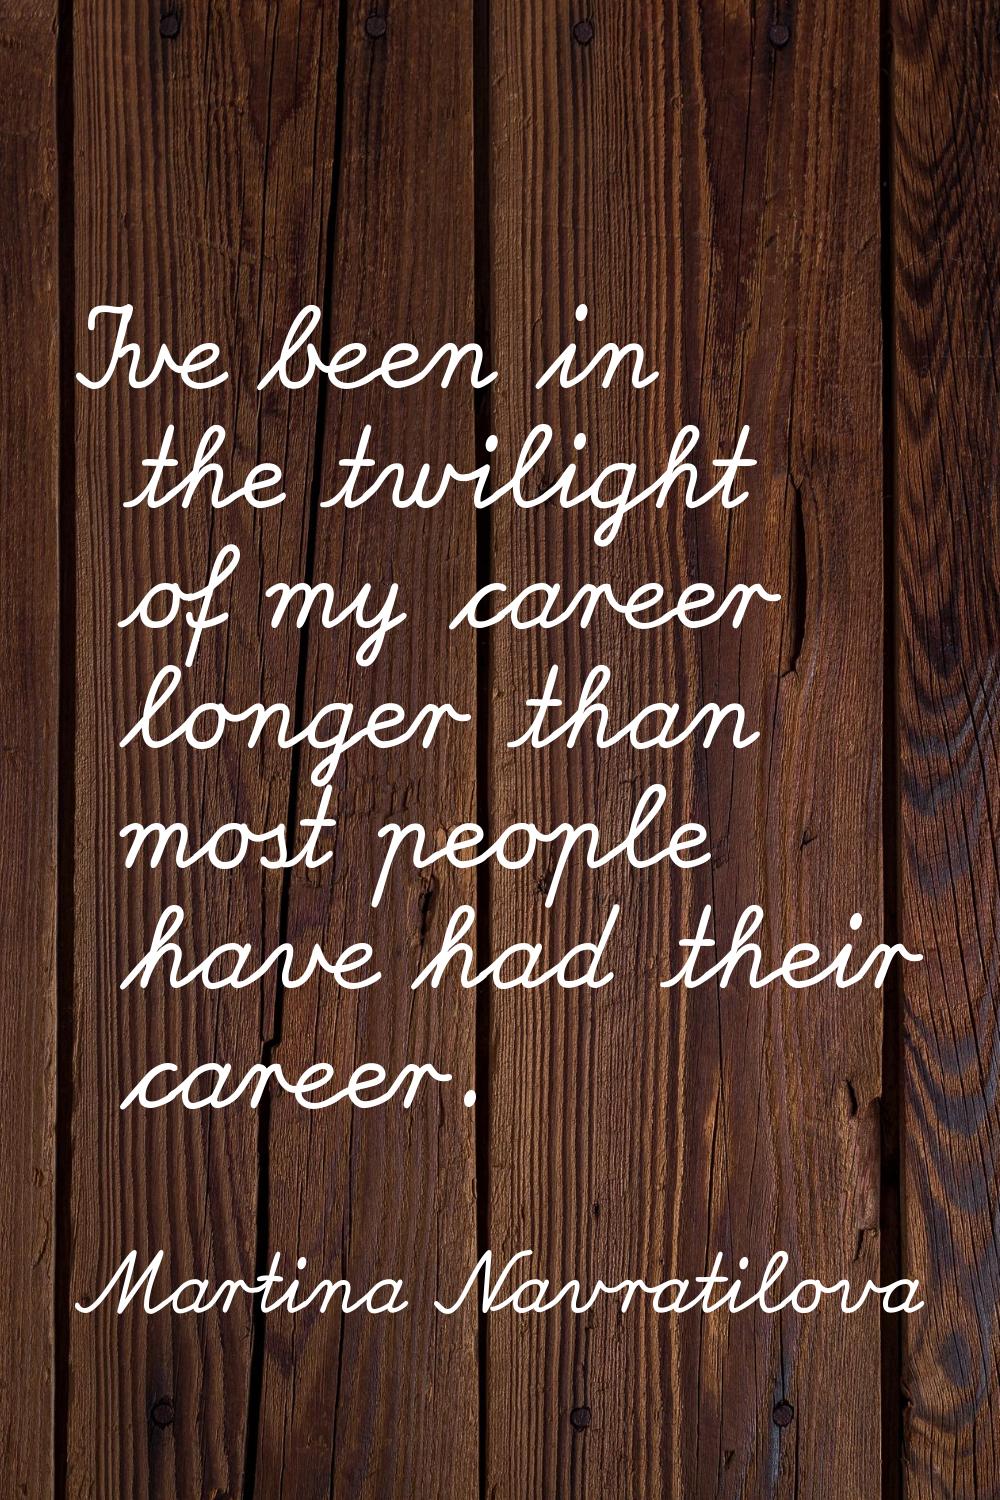 I've been in the twilight of my career longer than most people have had their career.